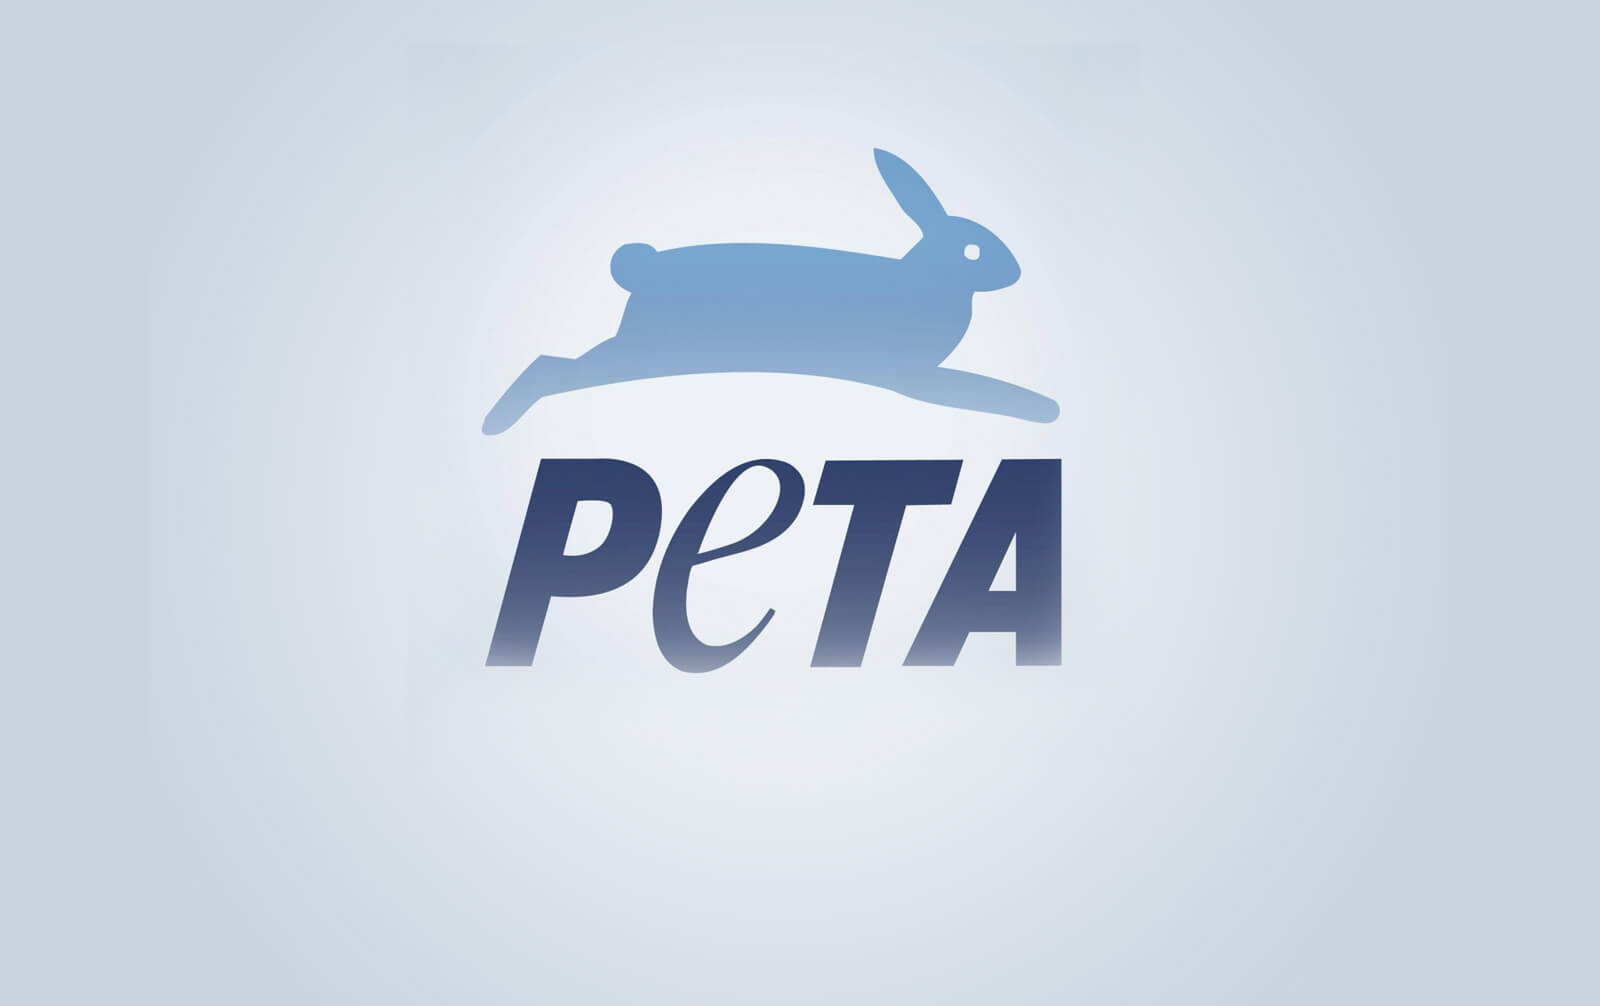 peta facebook placeholder new Woman Who Faked Hollywood Chimpanzee’s Death Ordered to Pay Quarter of a Million Dollars to PETA